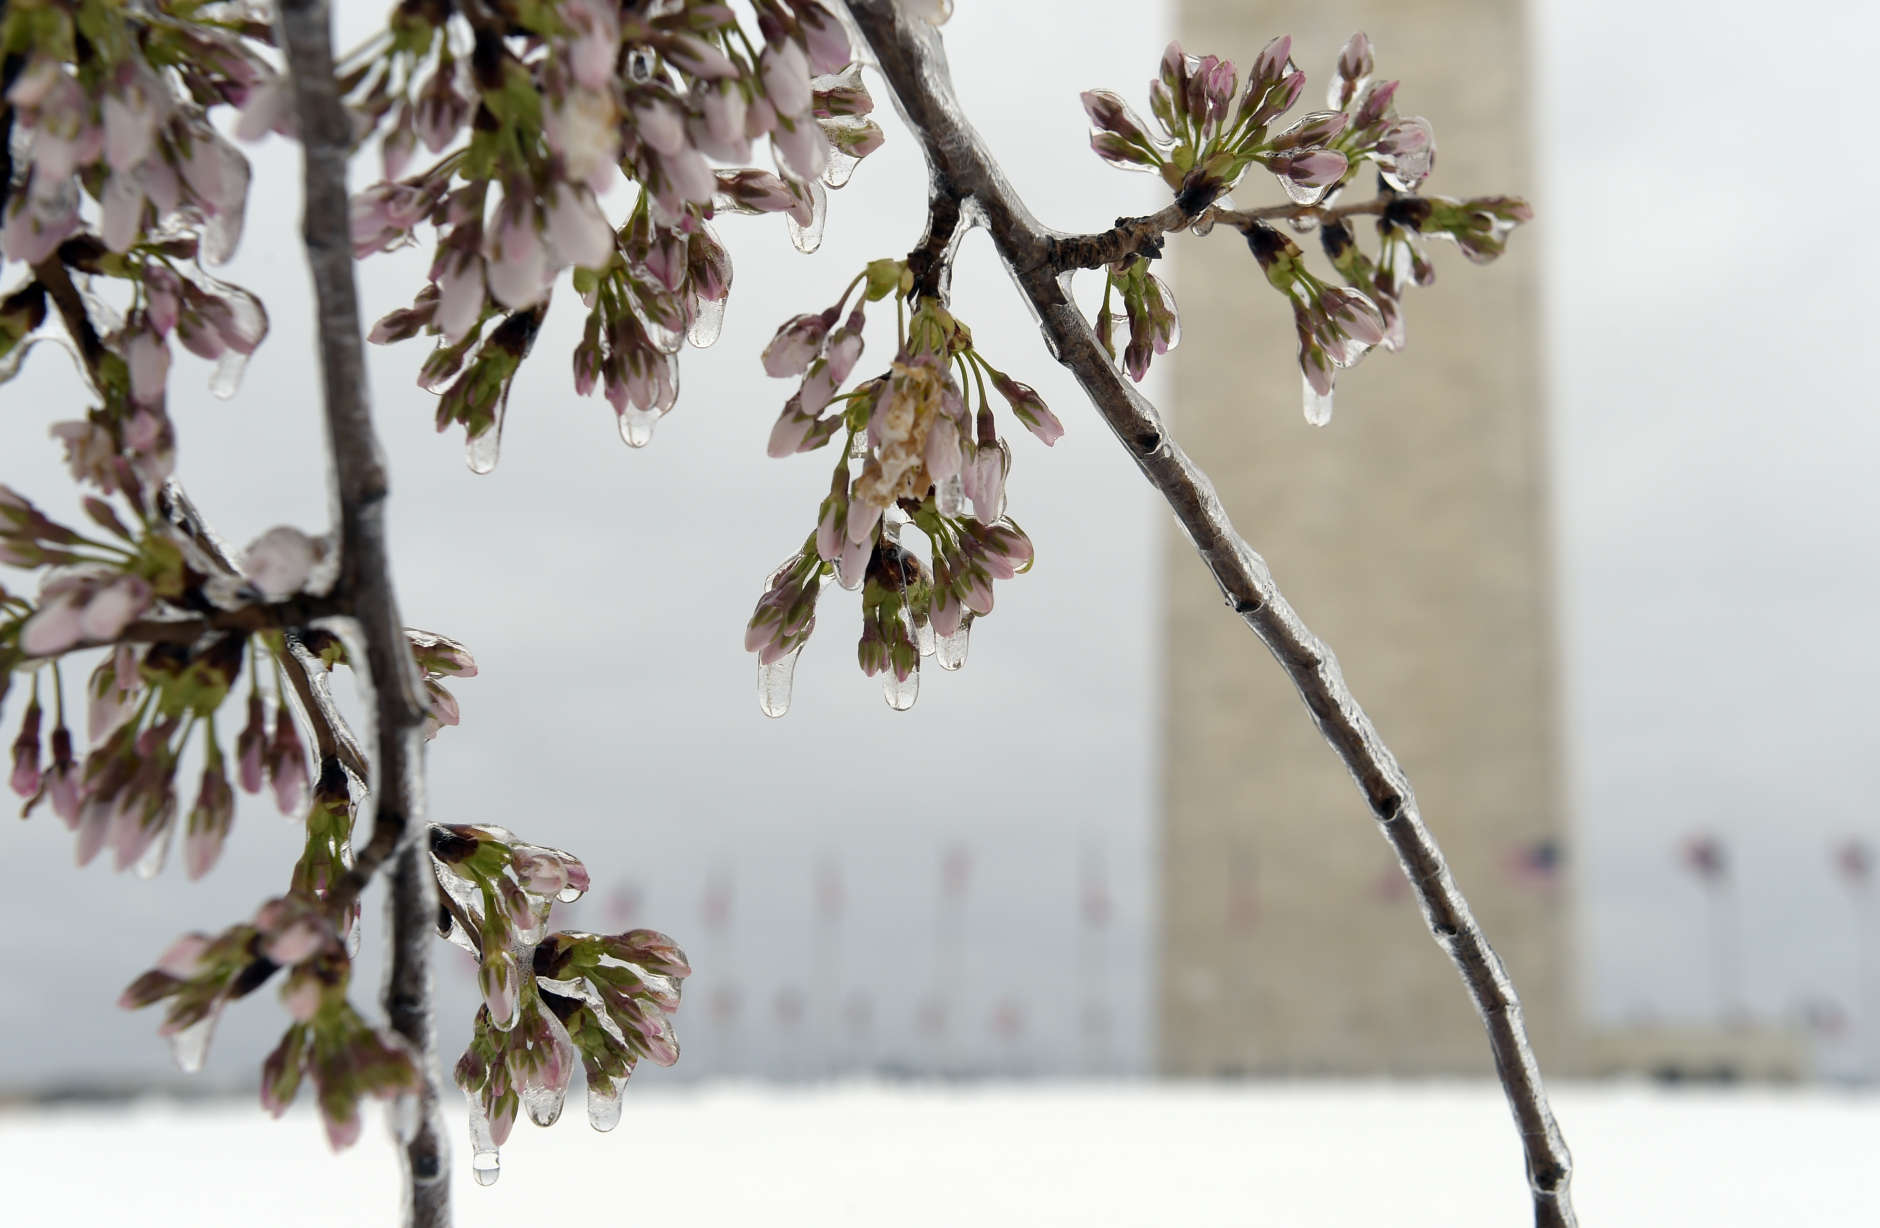 Washington's famed cherry blossoms were covered in ice during a late winter storm in Washington, Tuesday, March 14, 2017. The National Park Service was concerned about the impact of cold weather on the blossoms. (AP Photo/Susan Walsh)